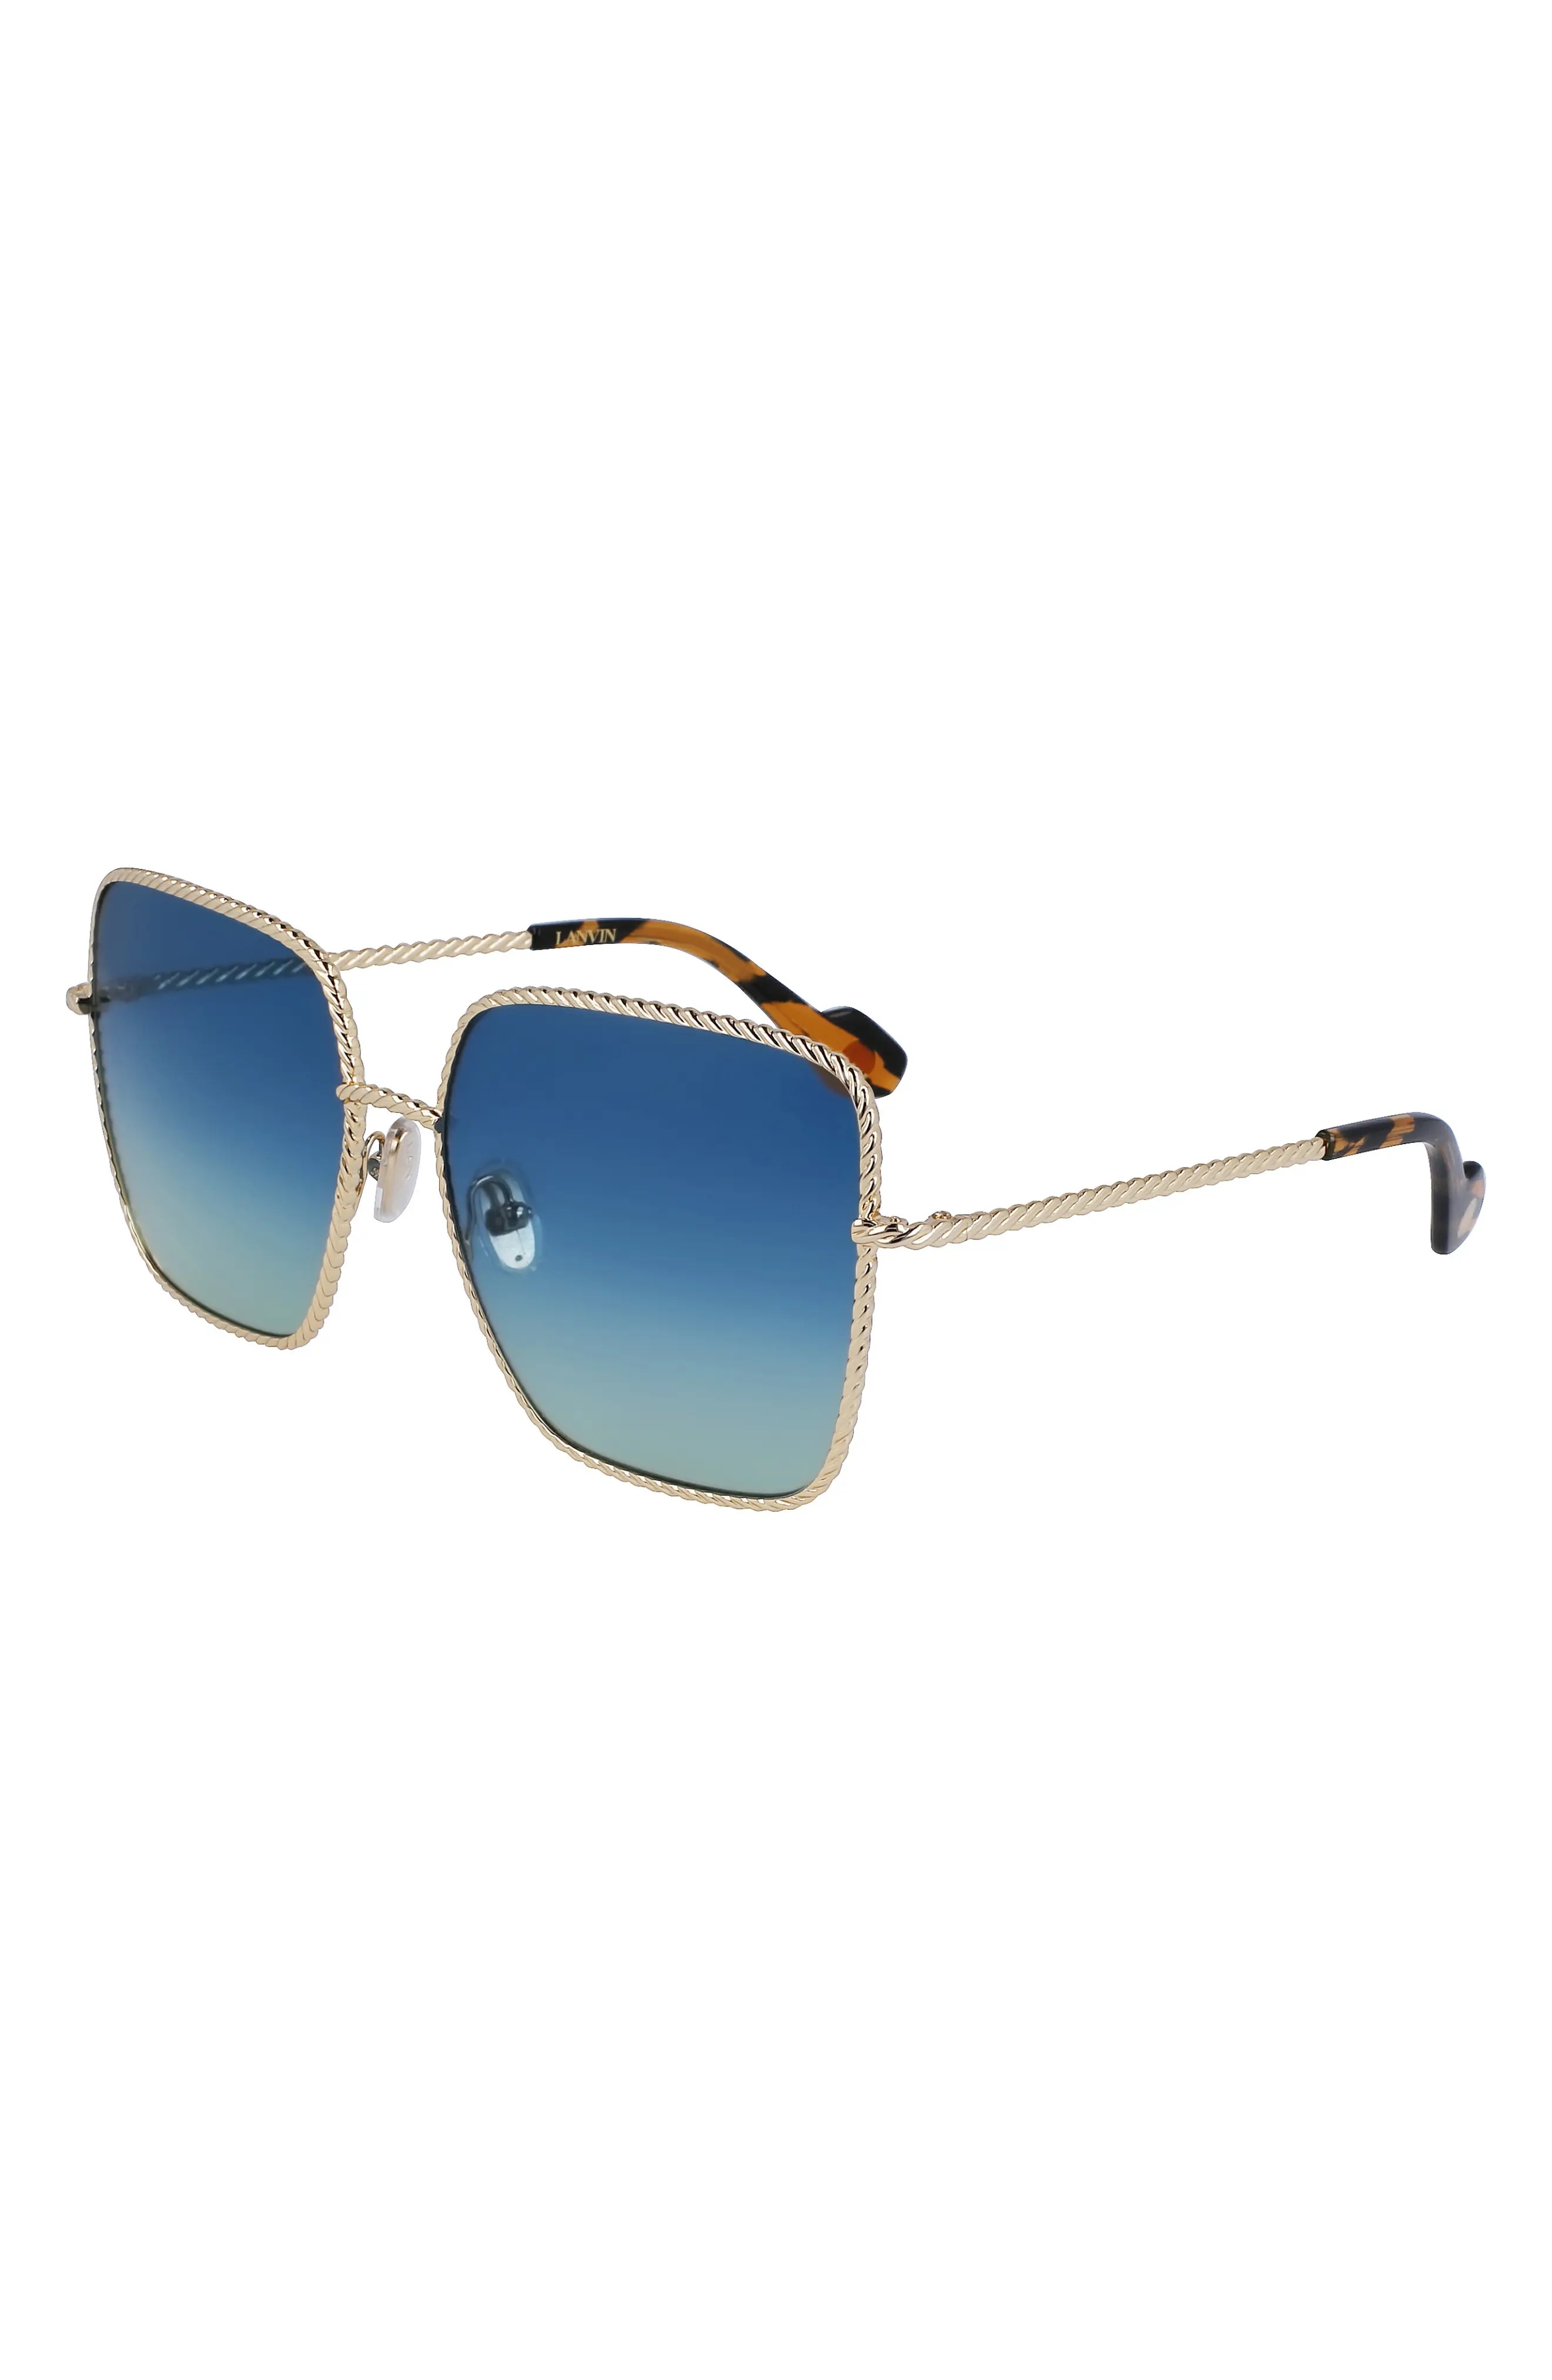 Babe 59mm Gradient Square Sunglasses in Gold/Gradient Blue Green - 2